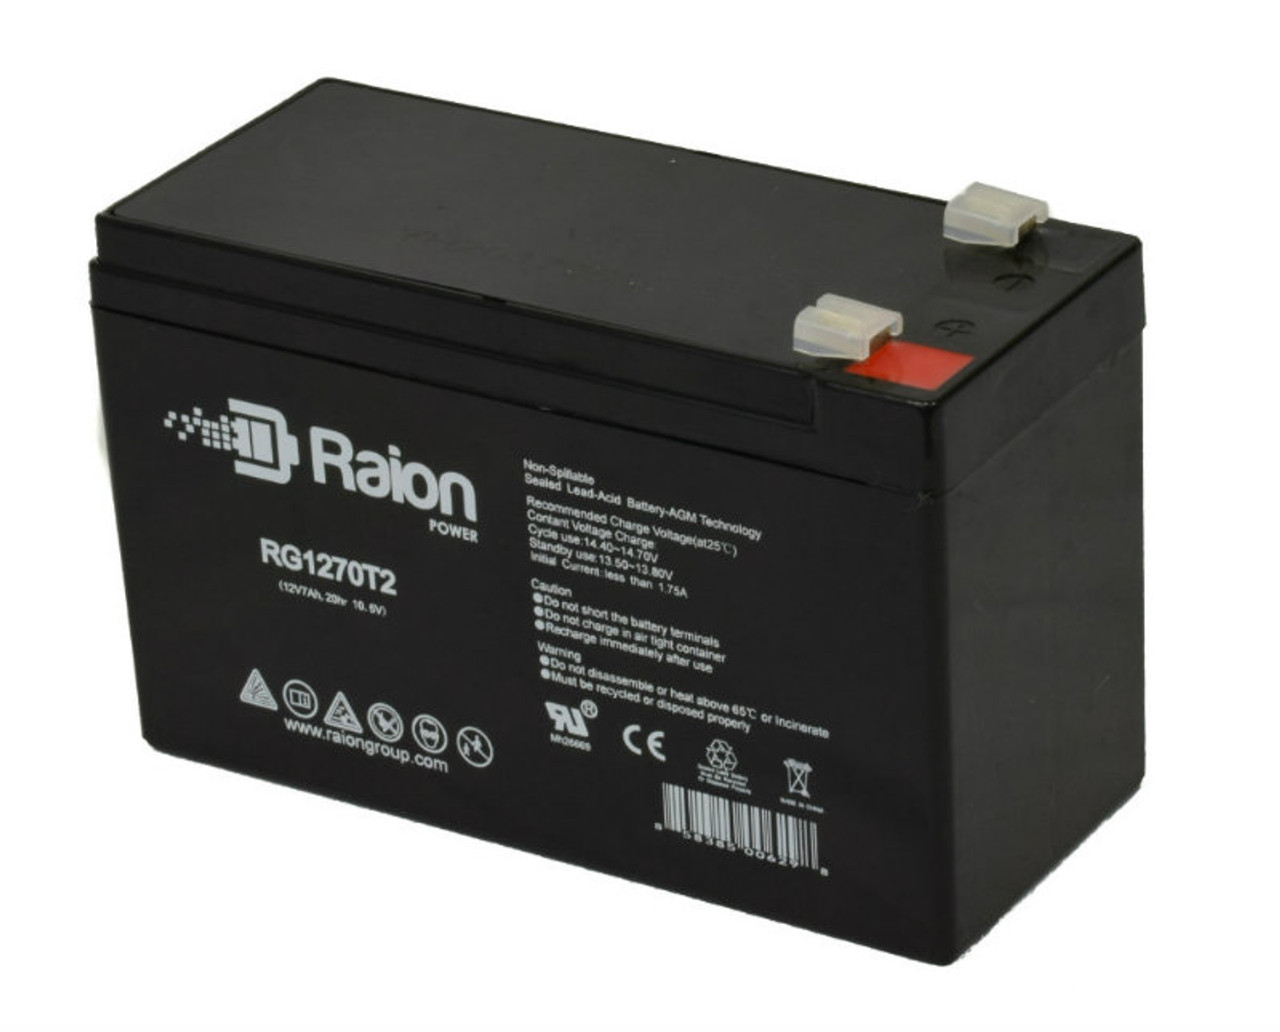 Raion Power RG1270T1 12V 7Ah Non-Spillable Replacement Battery for Panasonic LC-R12V7.2P